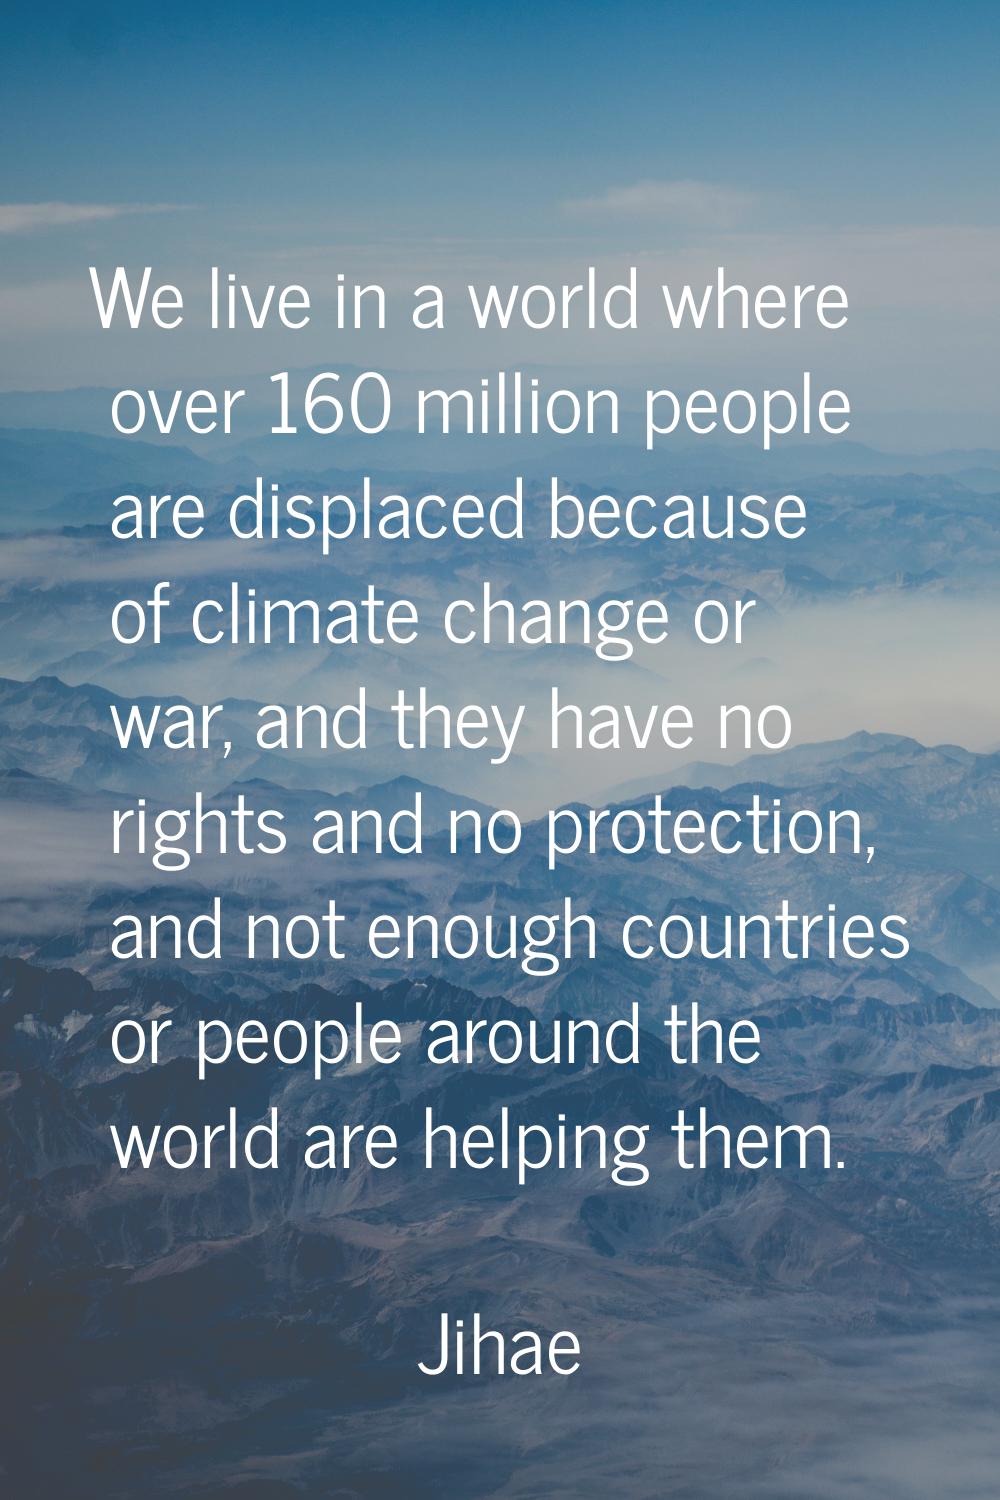 We live in a world where over 160 million people are displaced because of climate change or war, an